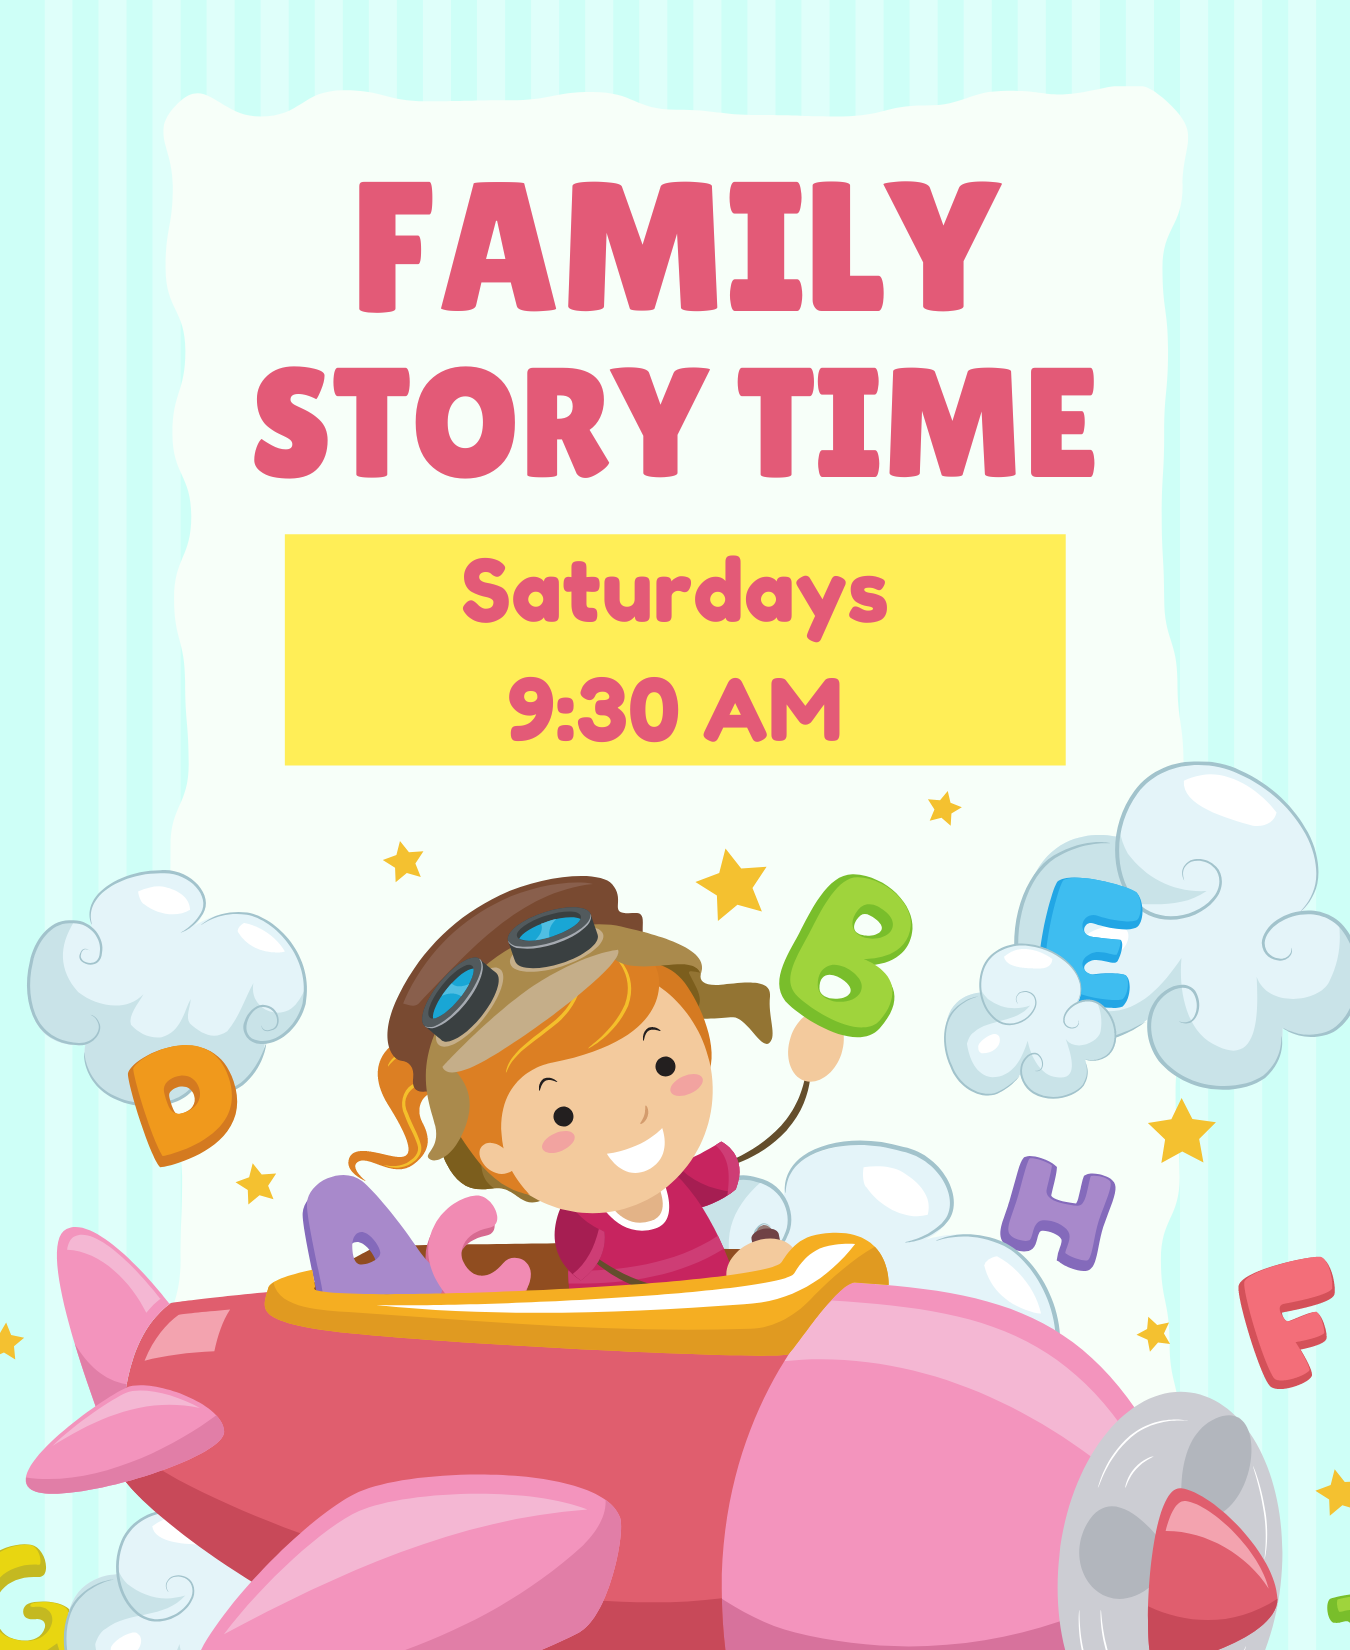 Family Story Time Saturdays 9:30 AM